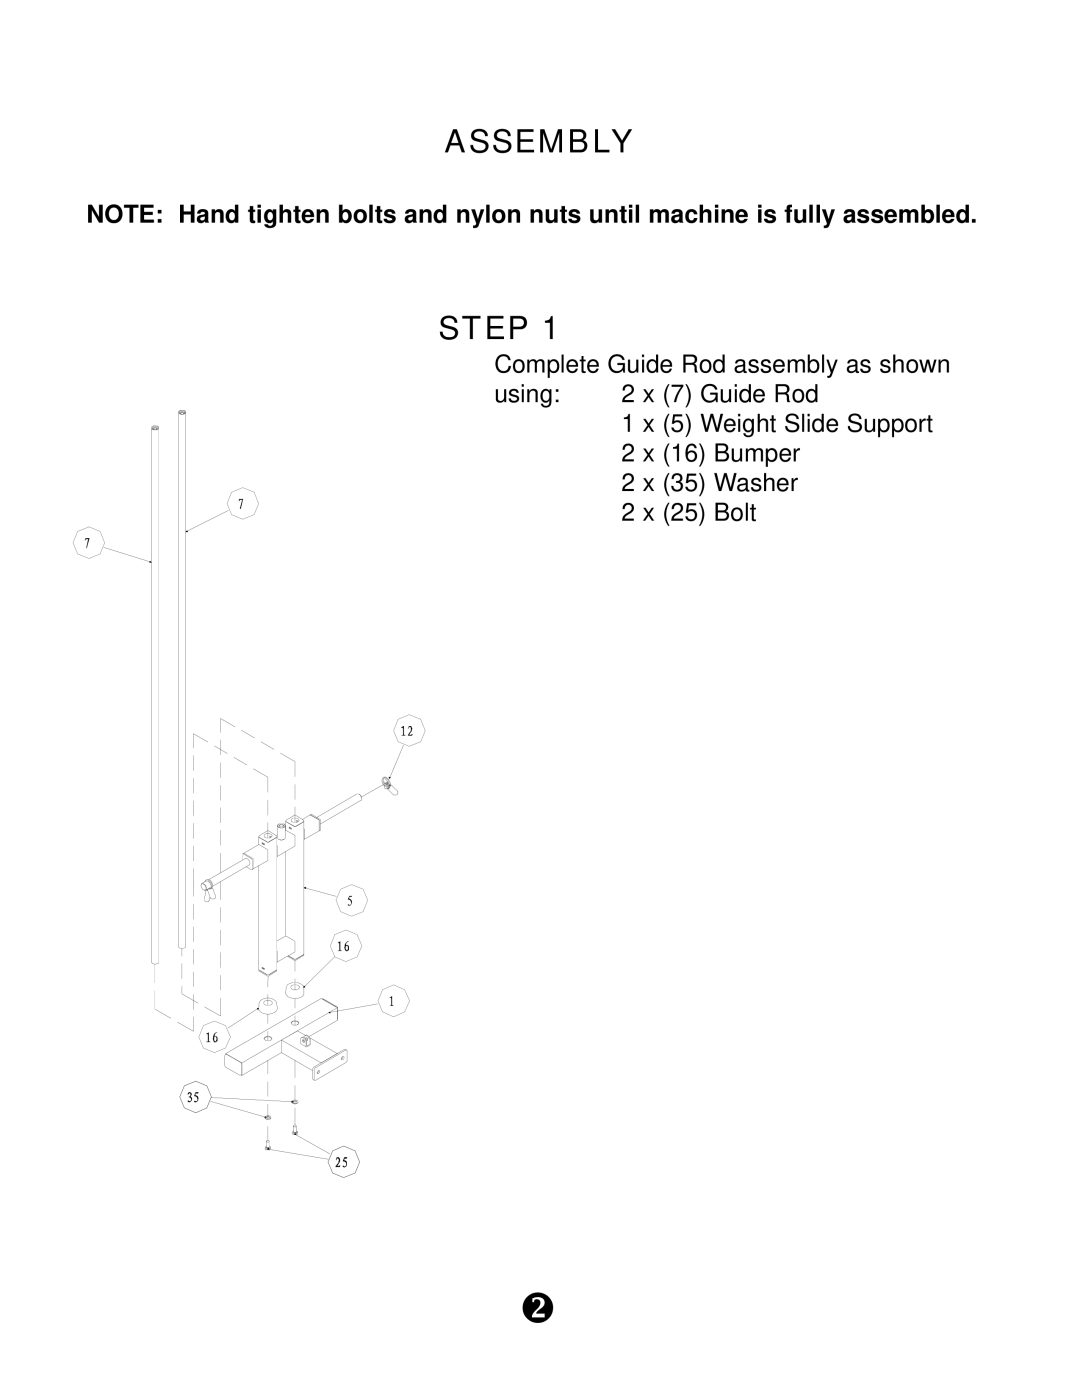 Keys Fitness KPS-PCL manual Assembly, Step, Complete Guide Rod assembly as shown using 2 x 7 Guide Rod 